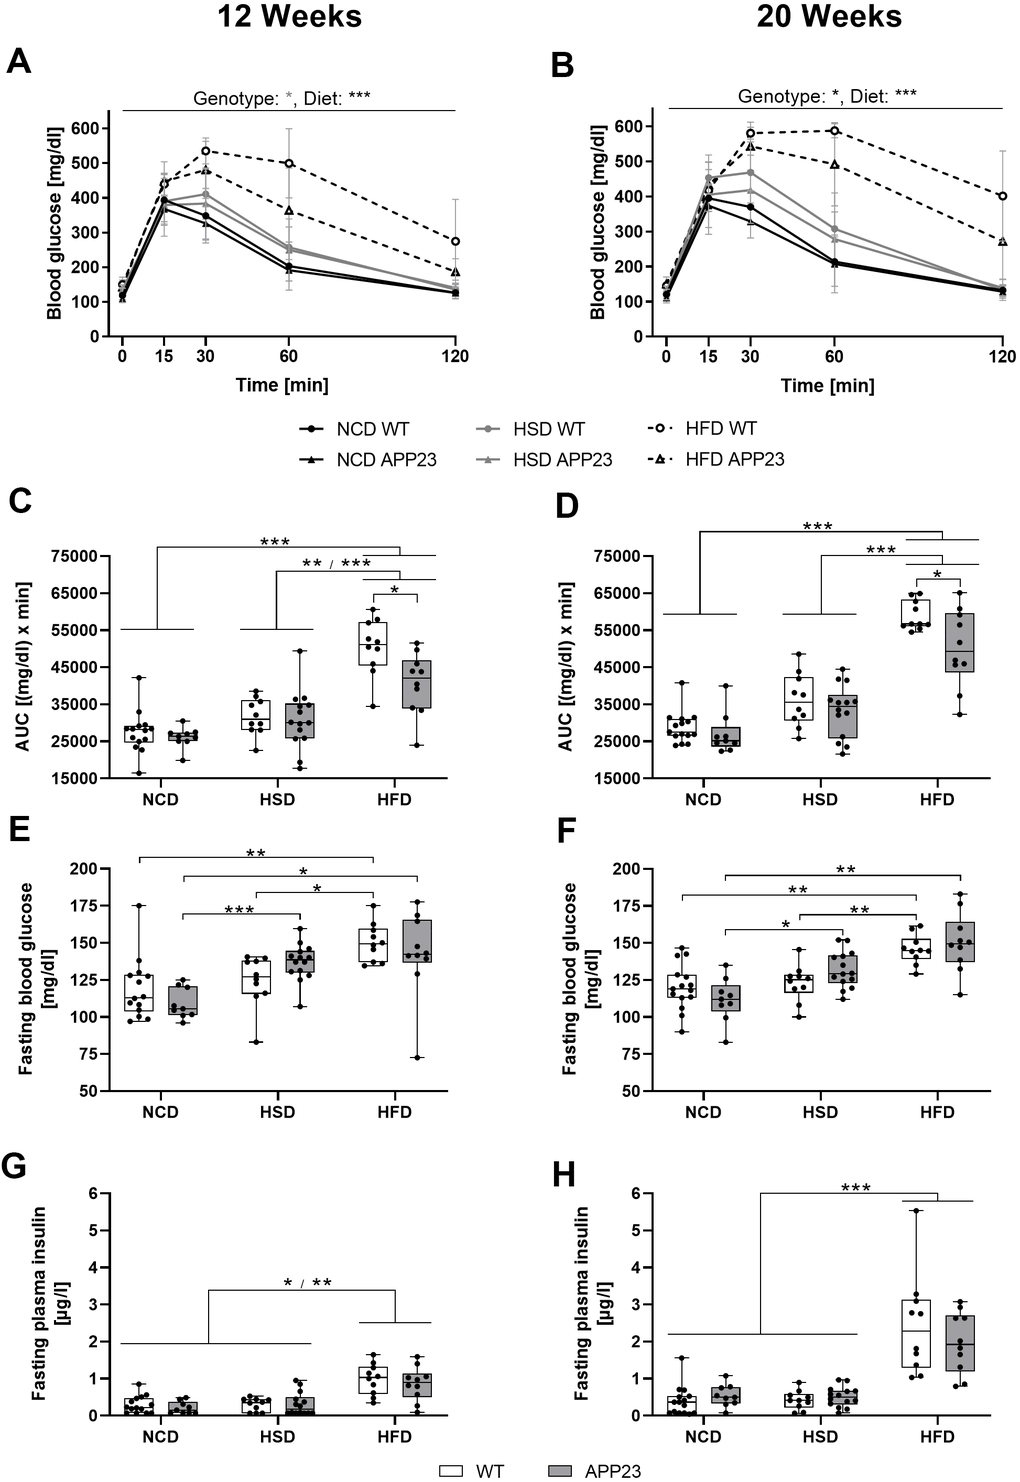 Acute glucose handling and fasting glucose homeostasis after 12 (left column) and 20 weeks (right column) of dietary interventions in APP23 and WT mice. (A, B) Course of blood glucose in an intraperitoneal glucose tolerance test (ipGTT) after 12 (A) and 20 weeks (B) and the corresponding area under the curve (AUC) (C, D). The corresponding basal blood glucose (E, F) and insulin levels (G, H) of WT and APP23 mice were analyzed after 6 h of fasting in the morning. Data are represented as box (25th to 75th percentile) with median and whiskers from minimum to maximum. Black asterisks indicate significant differences between groups (*: pA, B) ordinary 2-way ANOVA with Tukey post-hoc test (C, D) or nonparametric multiple contrast Tukey-type test (E–H). nNCD WT=15, nNCD APP23=9, nHSD WT=10, nHSD APP23=14, nHFD WT=10, nHFD APP23=10.